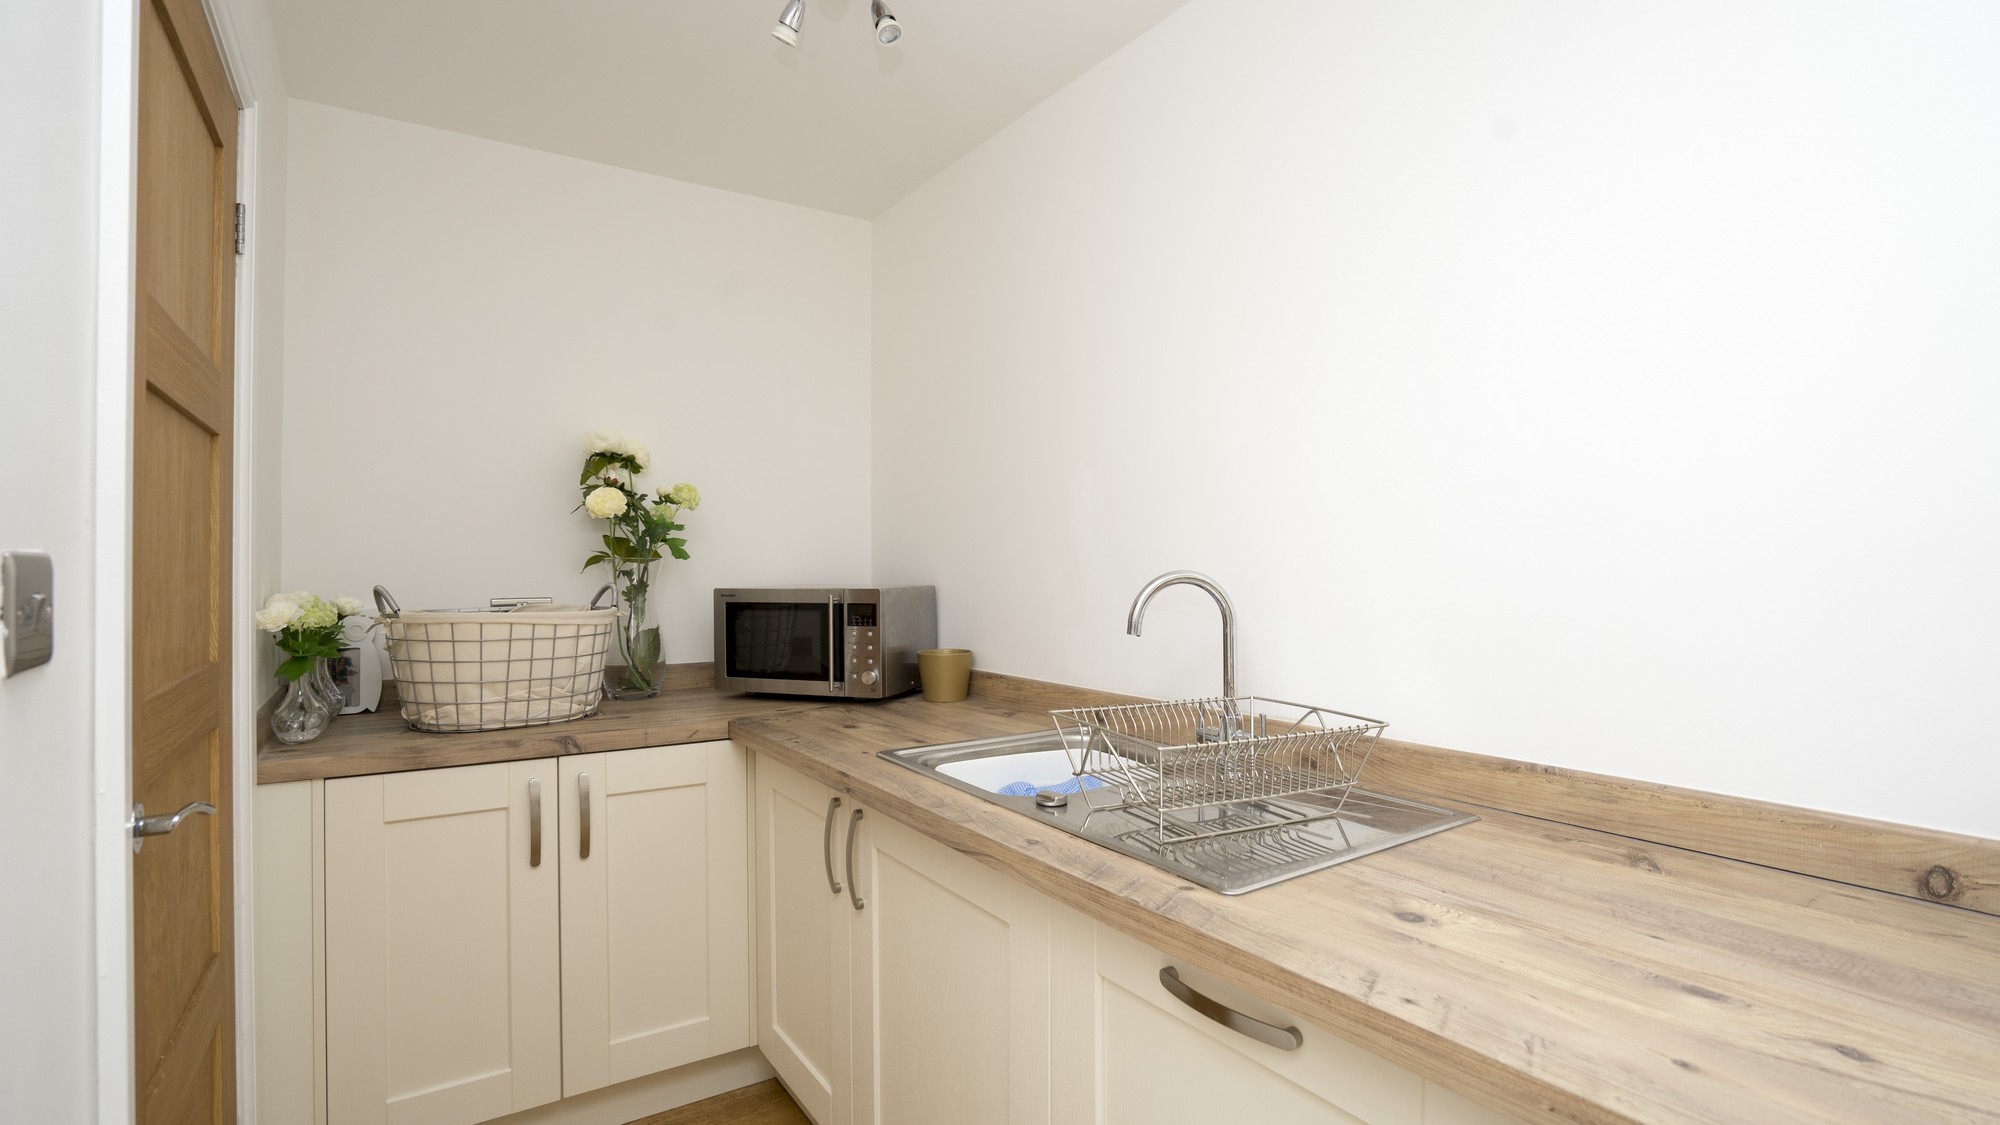 Image of the utility room fitted out with matching cabinets and composite worktops.